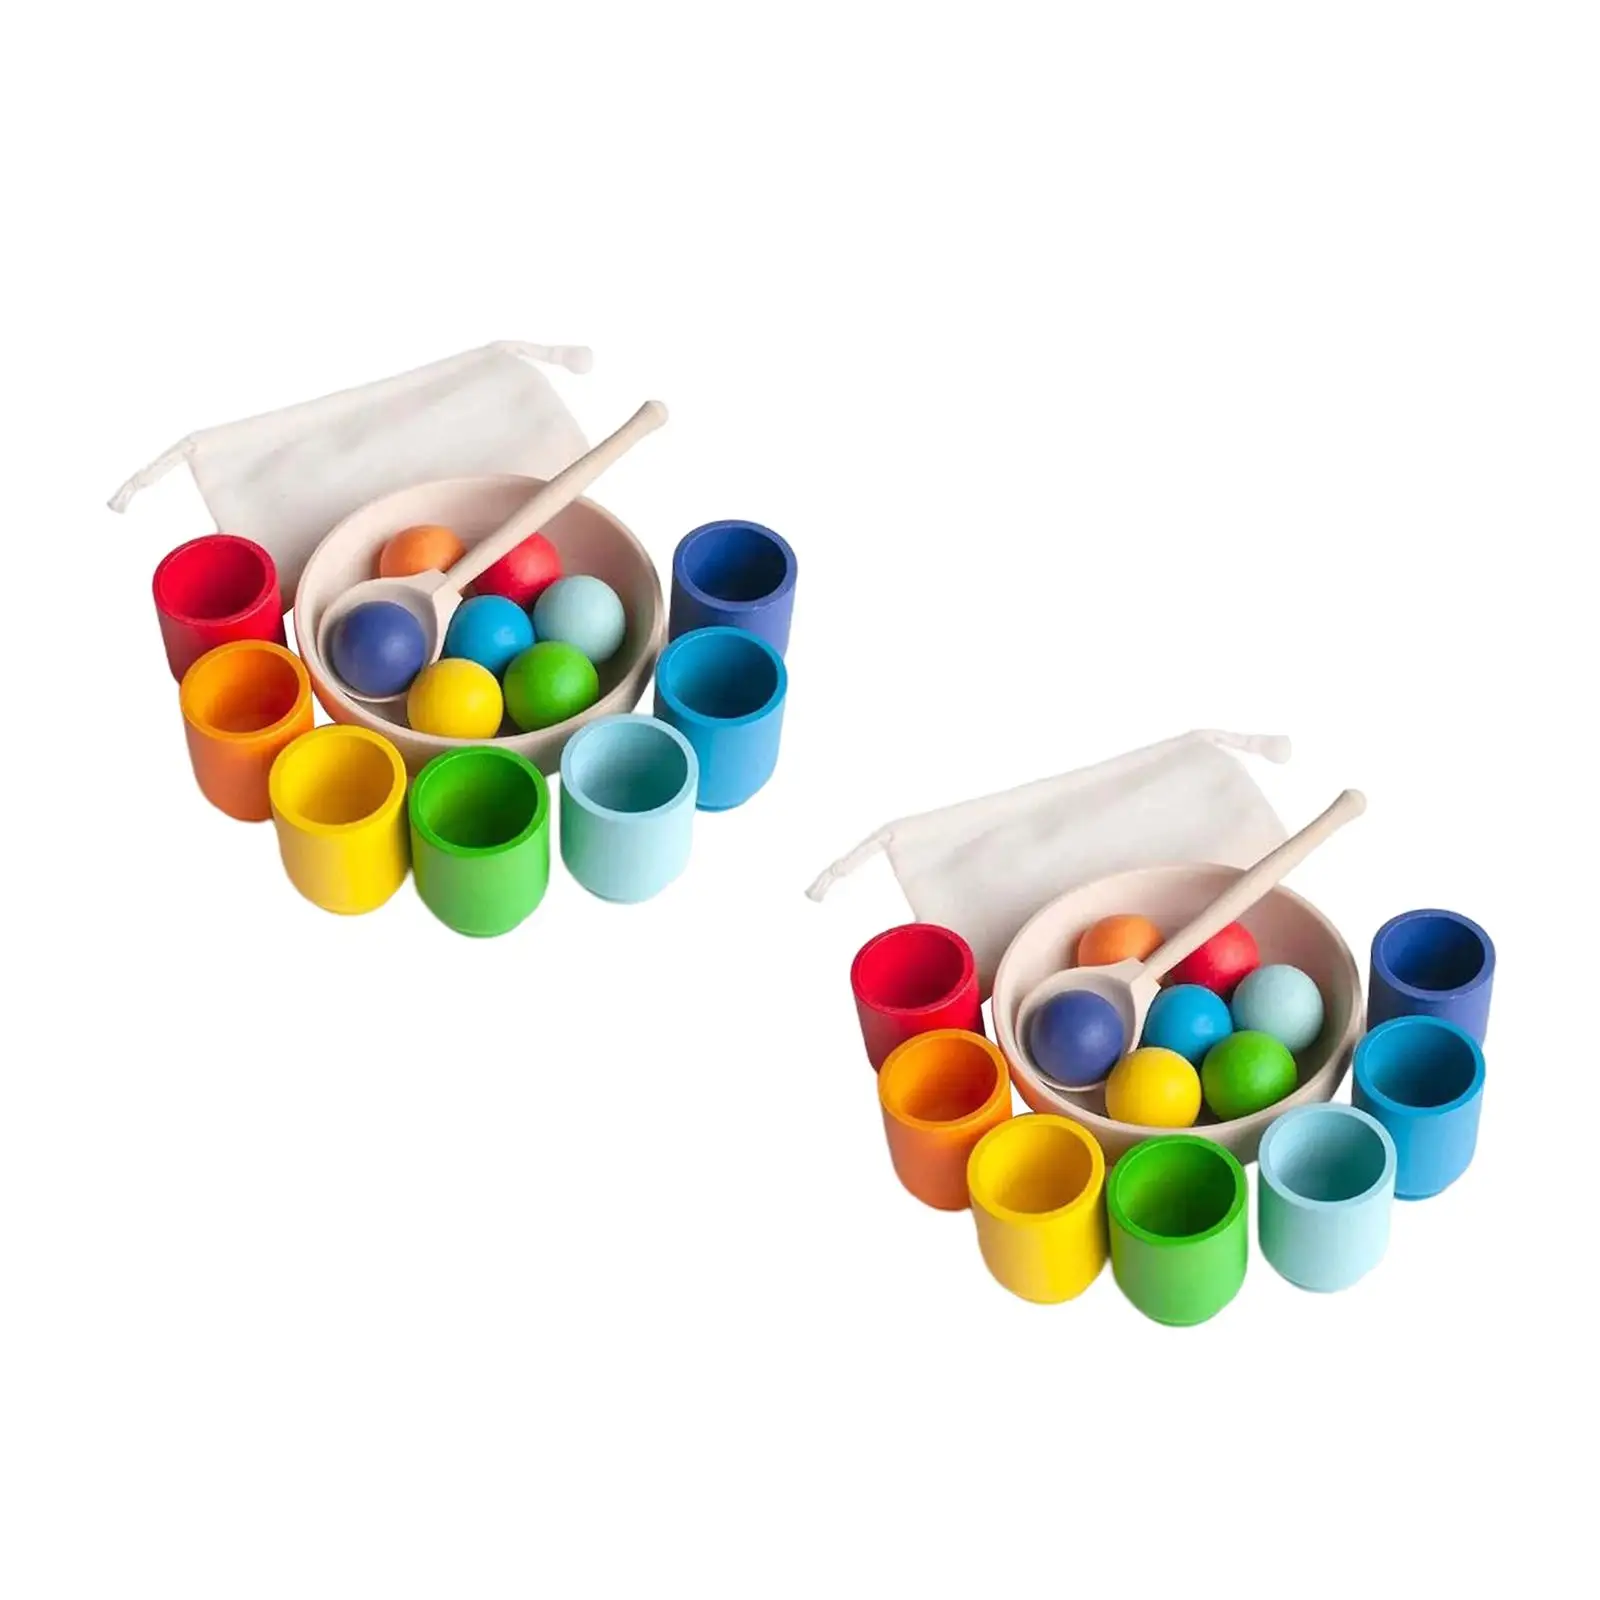 2 Set Rainbow Balls in Cups Montessori Board Game with Cups and Balls 